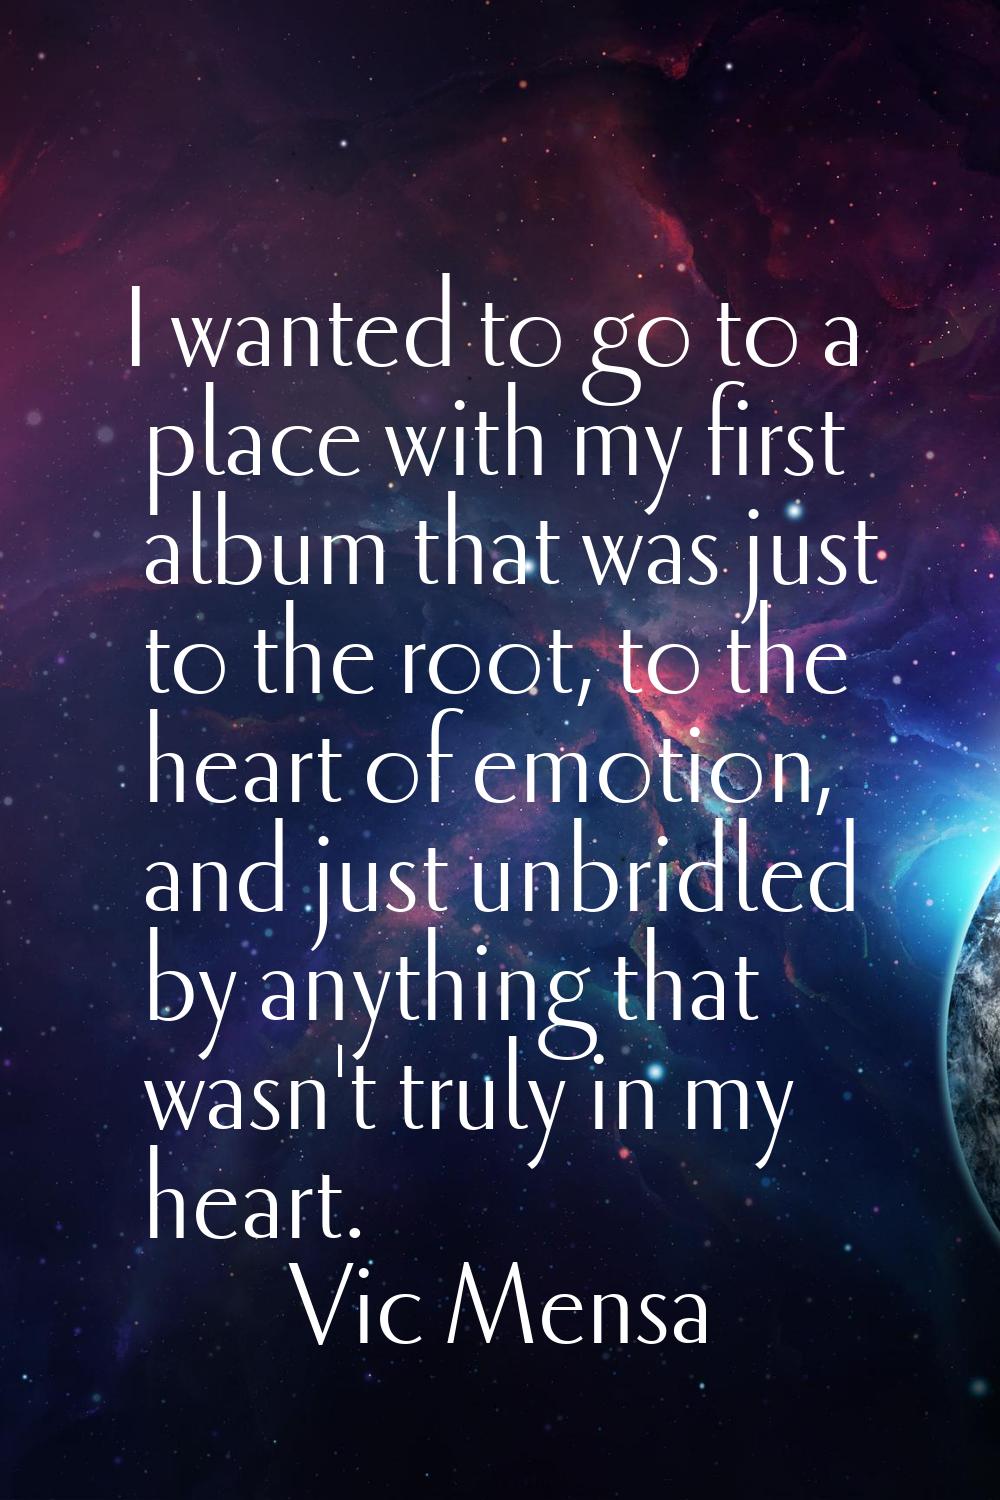 I wanted to go to a place with my first album that was just to the root, to the heart of emotion, a